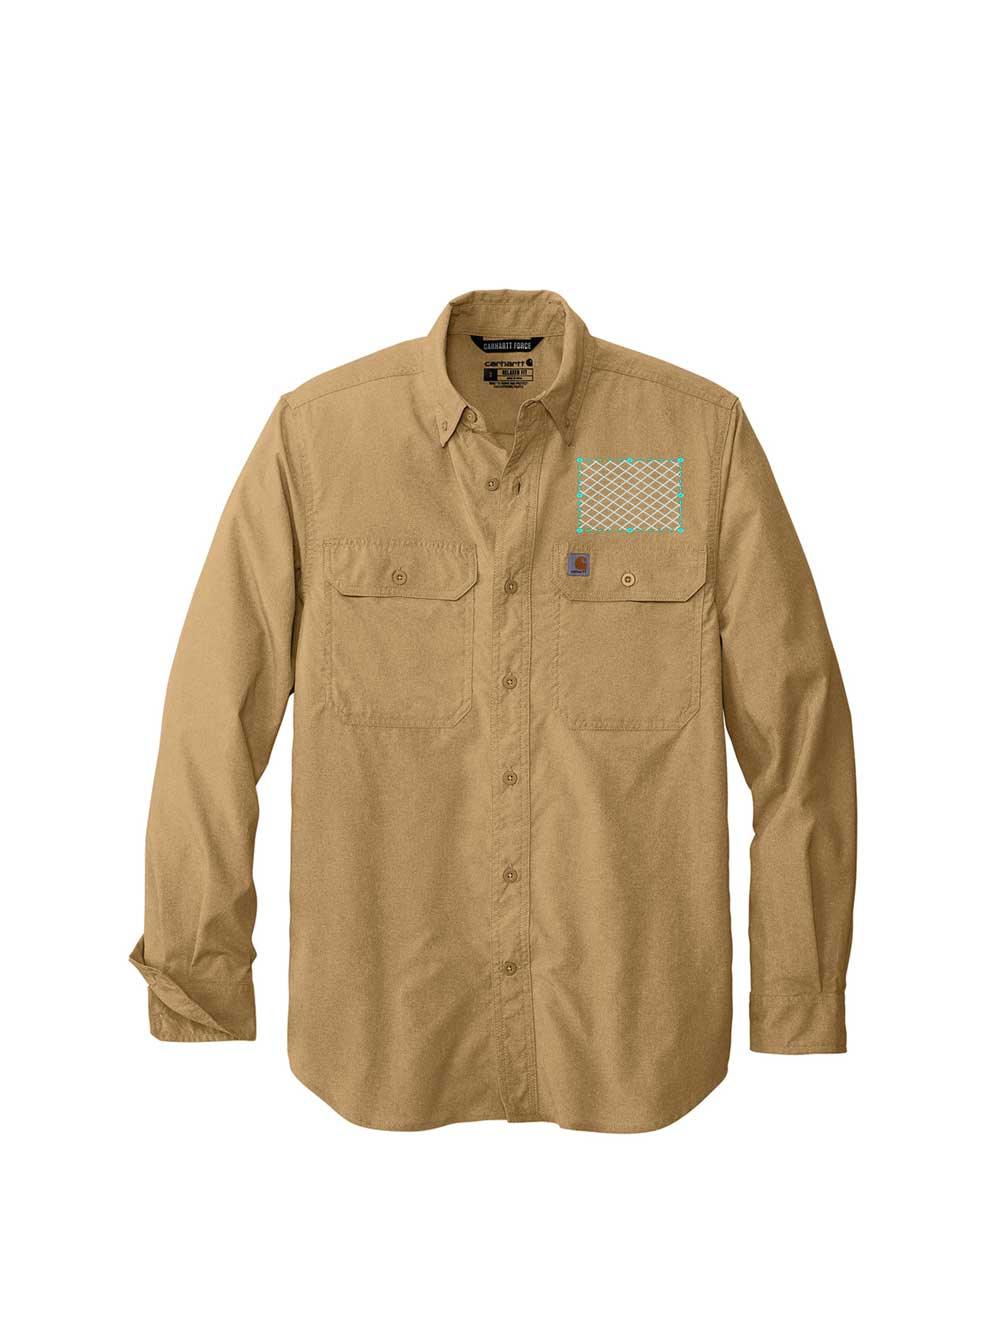 Embroidered Carhartt Force® Solid Long Sleeve Shirt - Constantly Create Shop